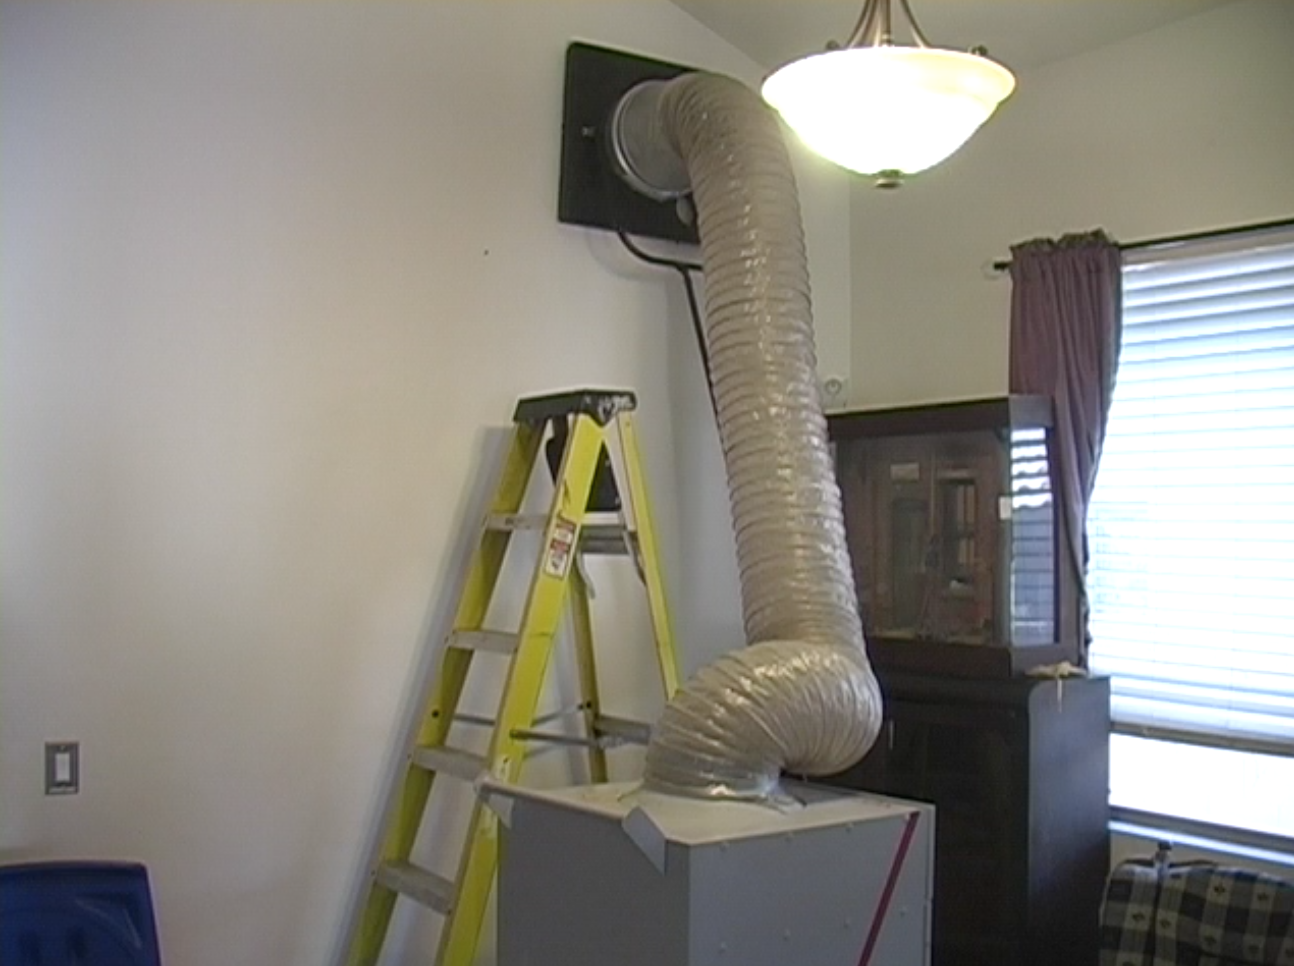 HEPA vacuum hooked up to air ducts system in Phoenix home.